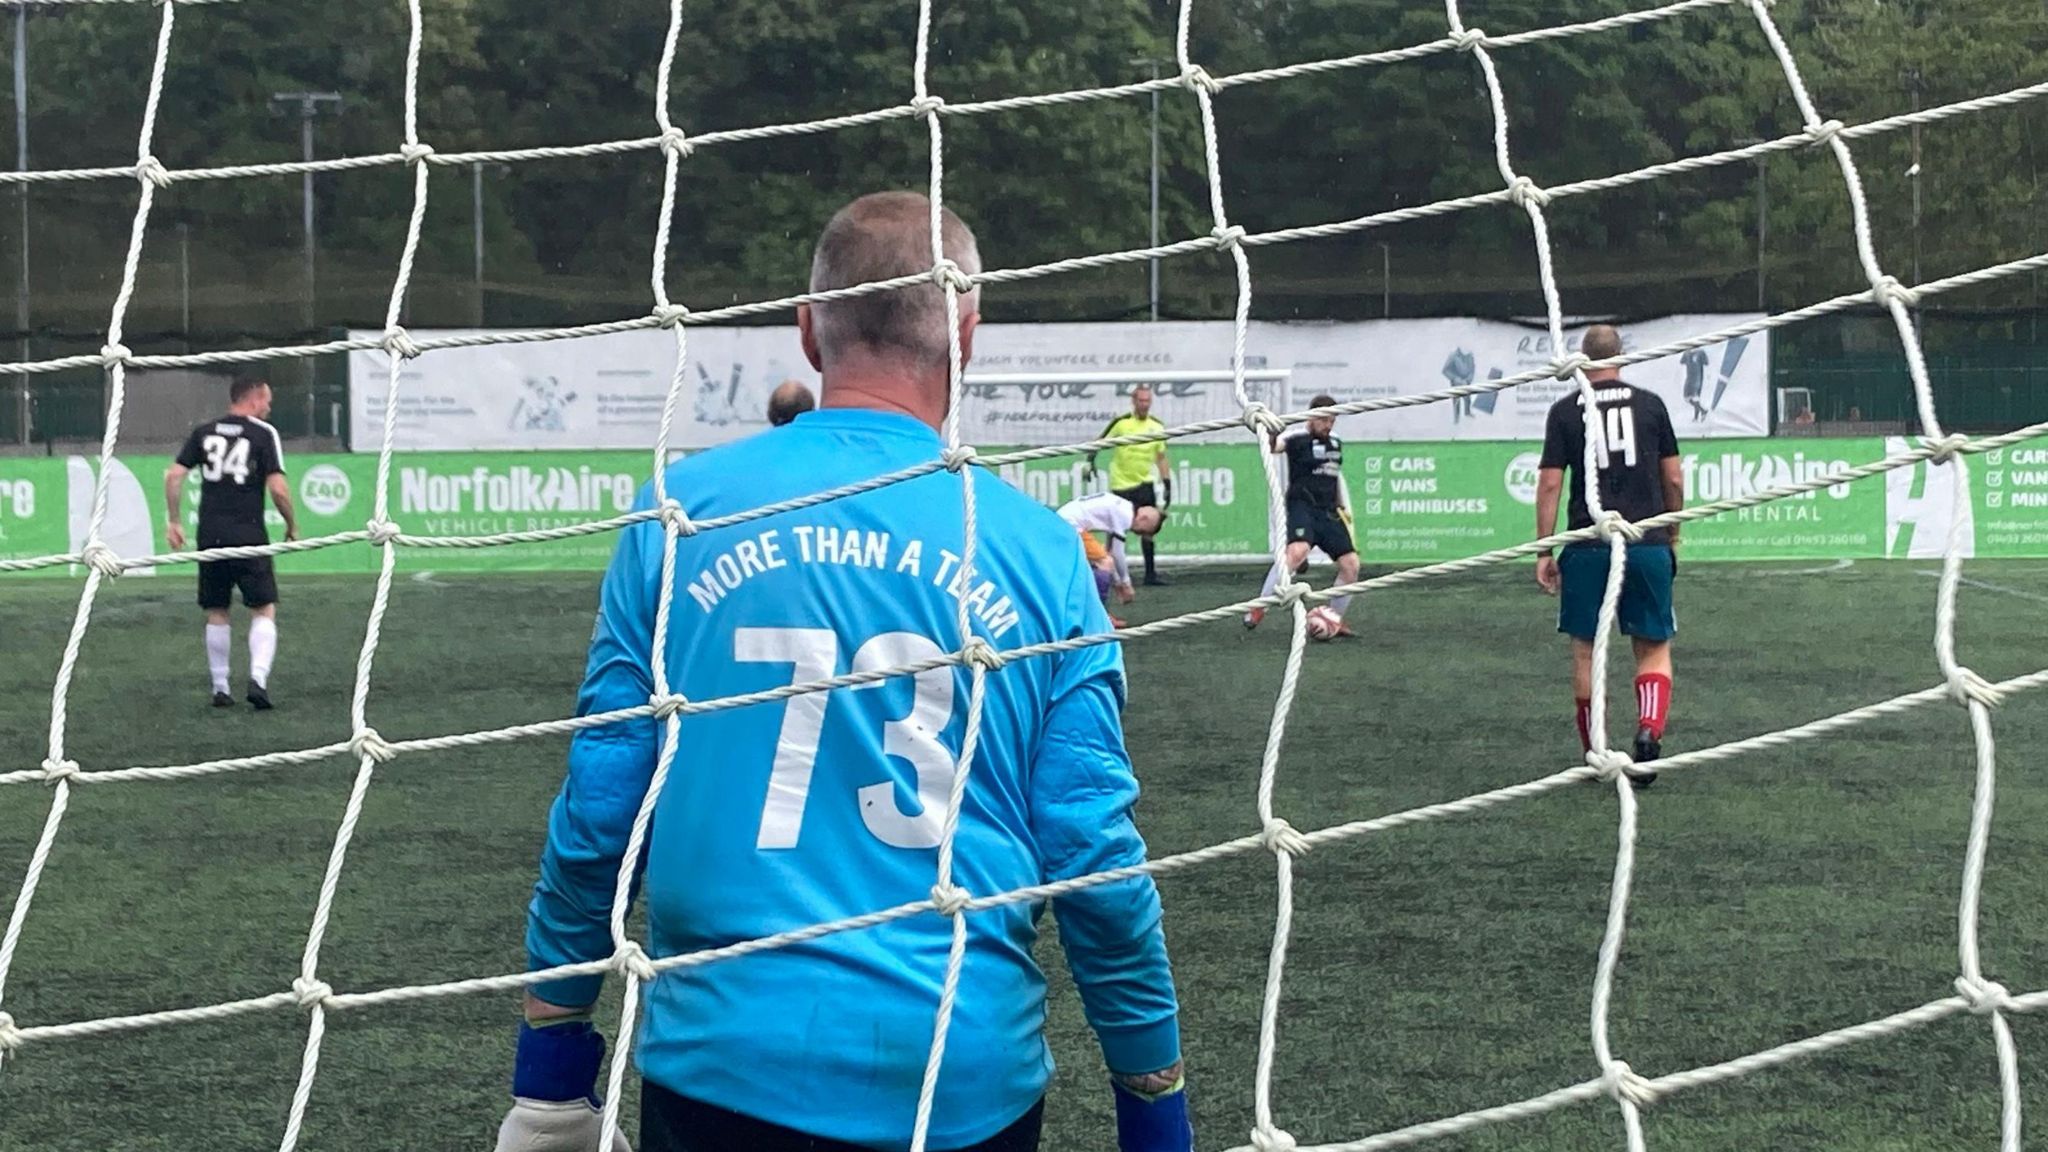 A football match from the viewpoint of behind the net of the goal. The goalie, who is wearing a light blue shirt that reads "More than a team" on its back, stands poised to receive the ball from players in front of him. 